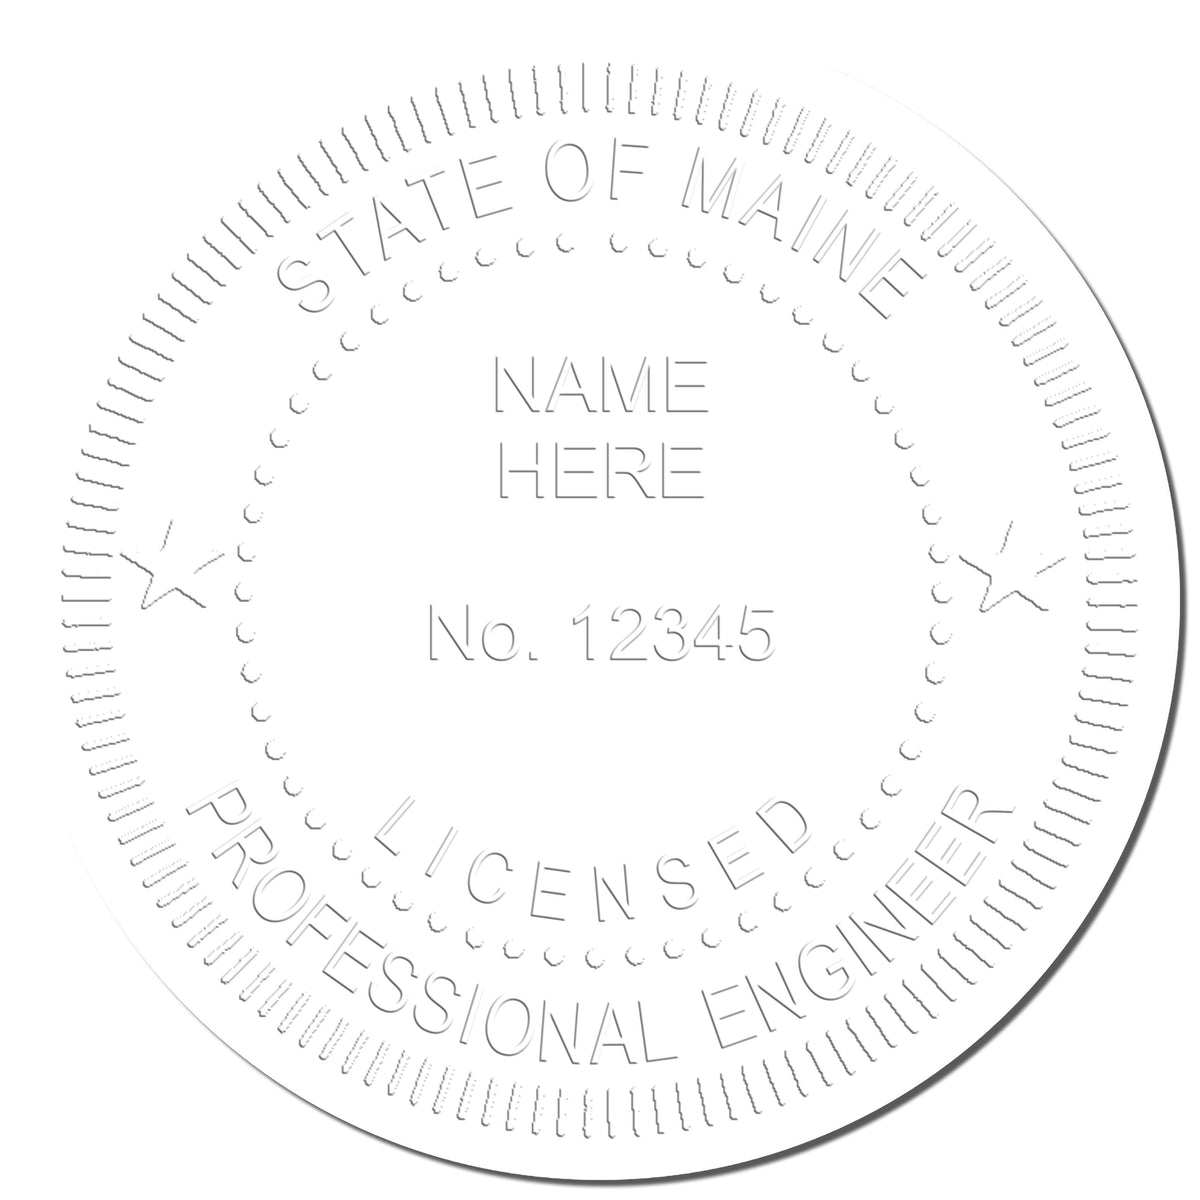 A photograph of the Handheld Maine Professional Engineer Embosser stamp impression reveals a vivid, professional image of the on paper.